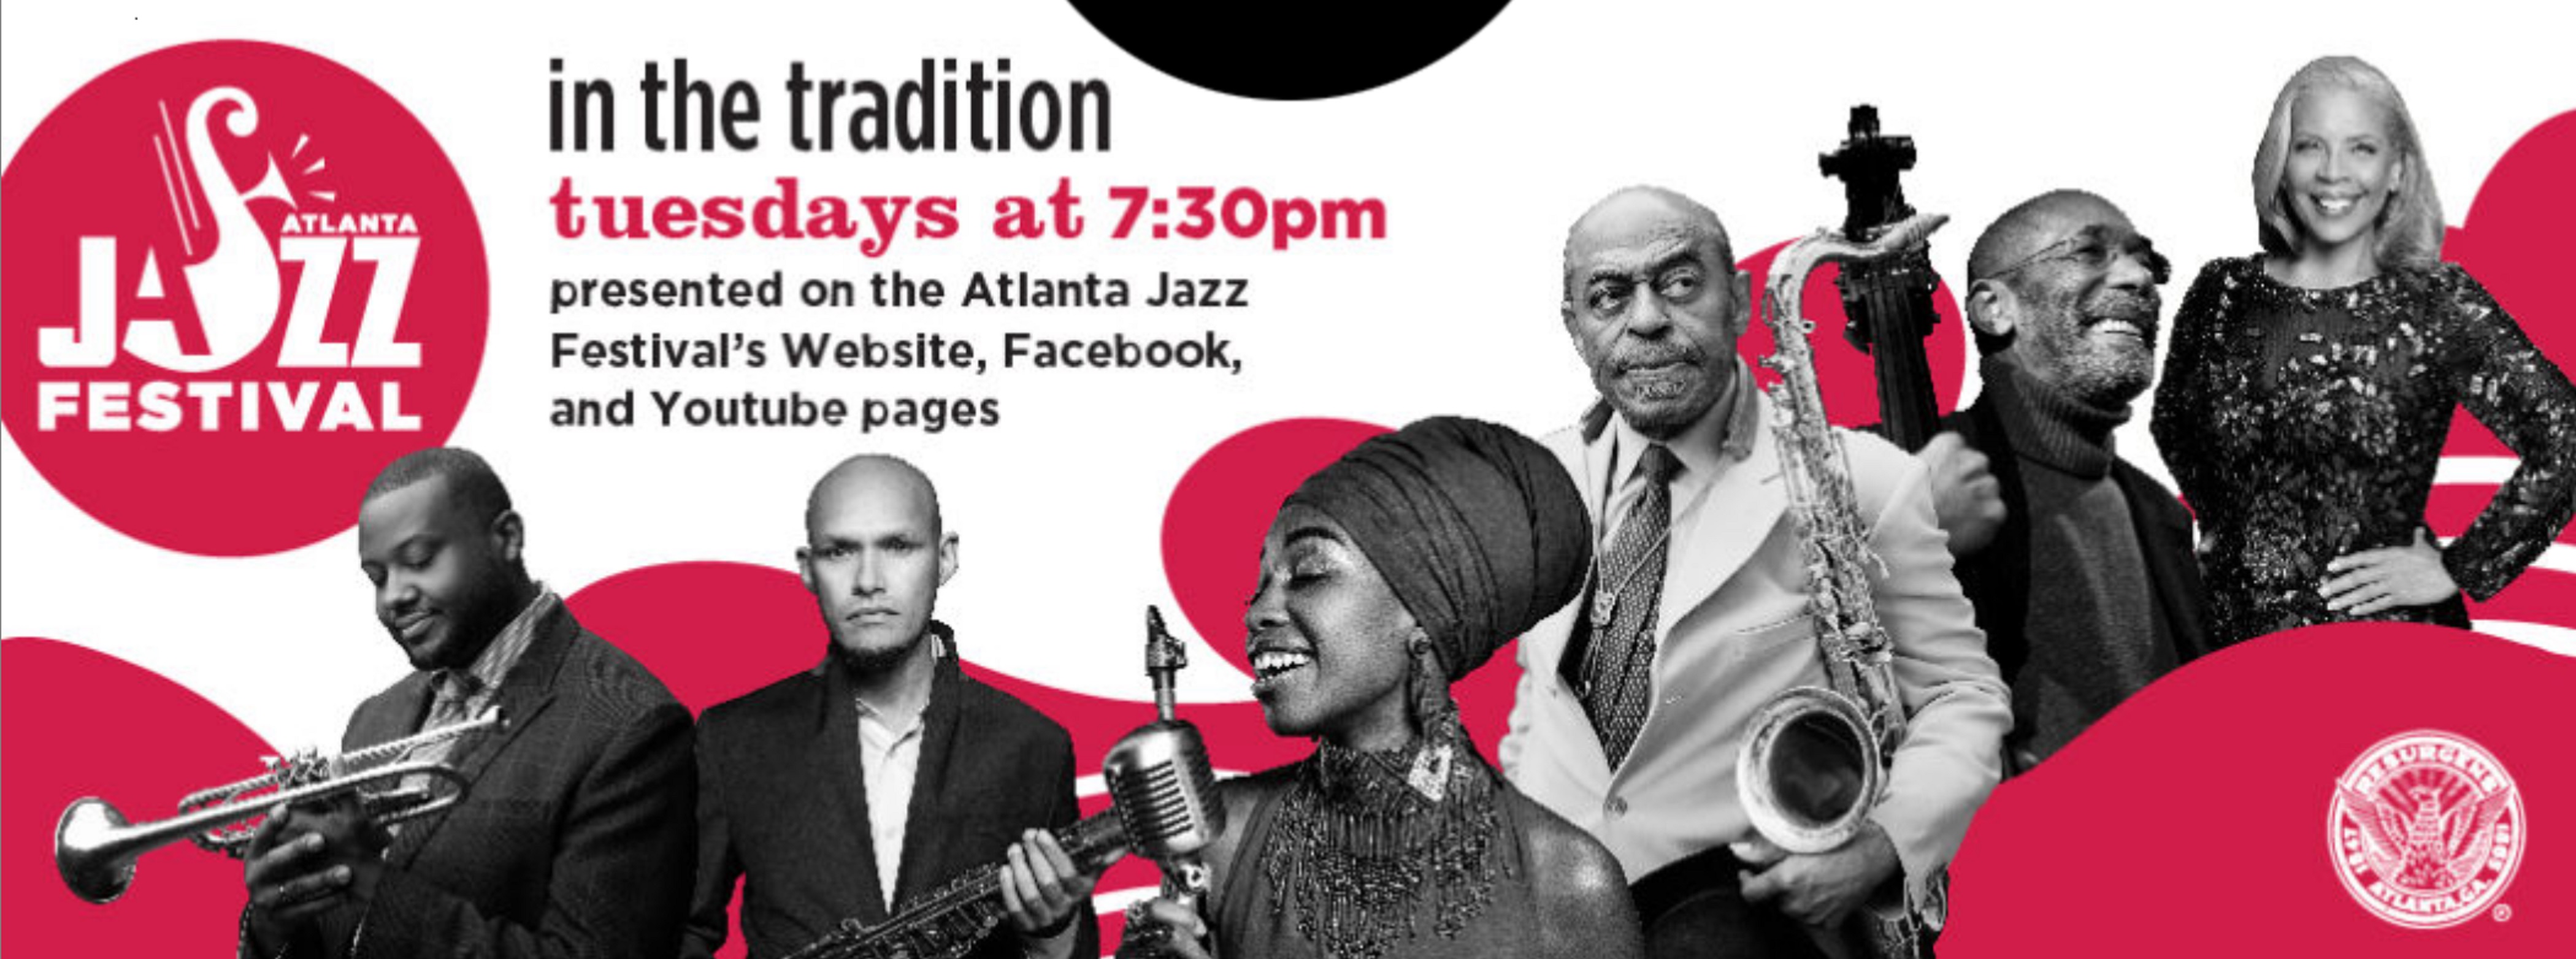 Atlanta Jazz Festival’s Free Virtual Jazz Series, In the Tradition, Will Begin on Tuesday, April 6